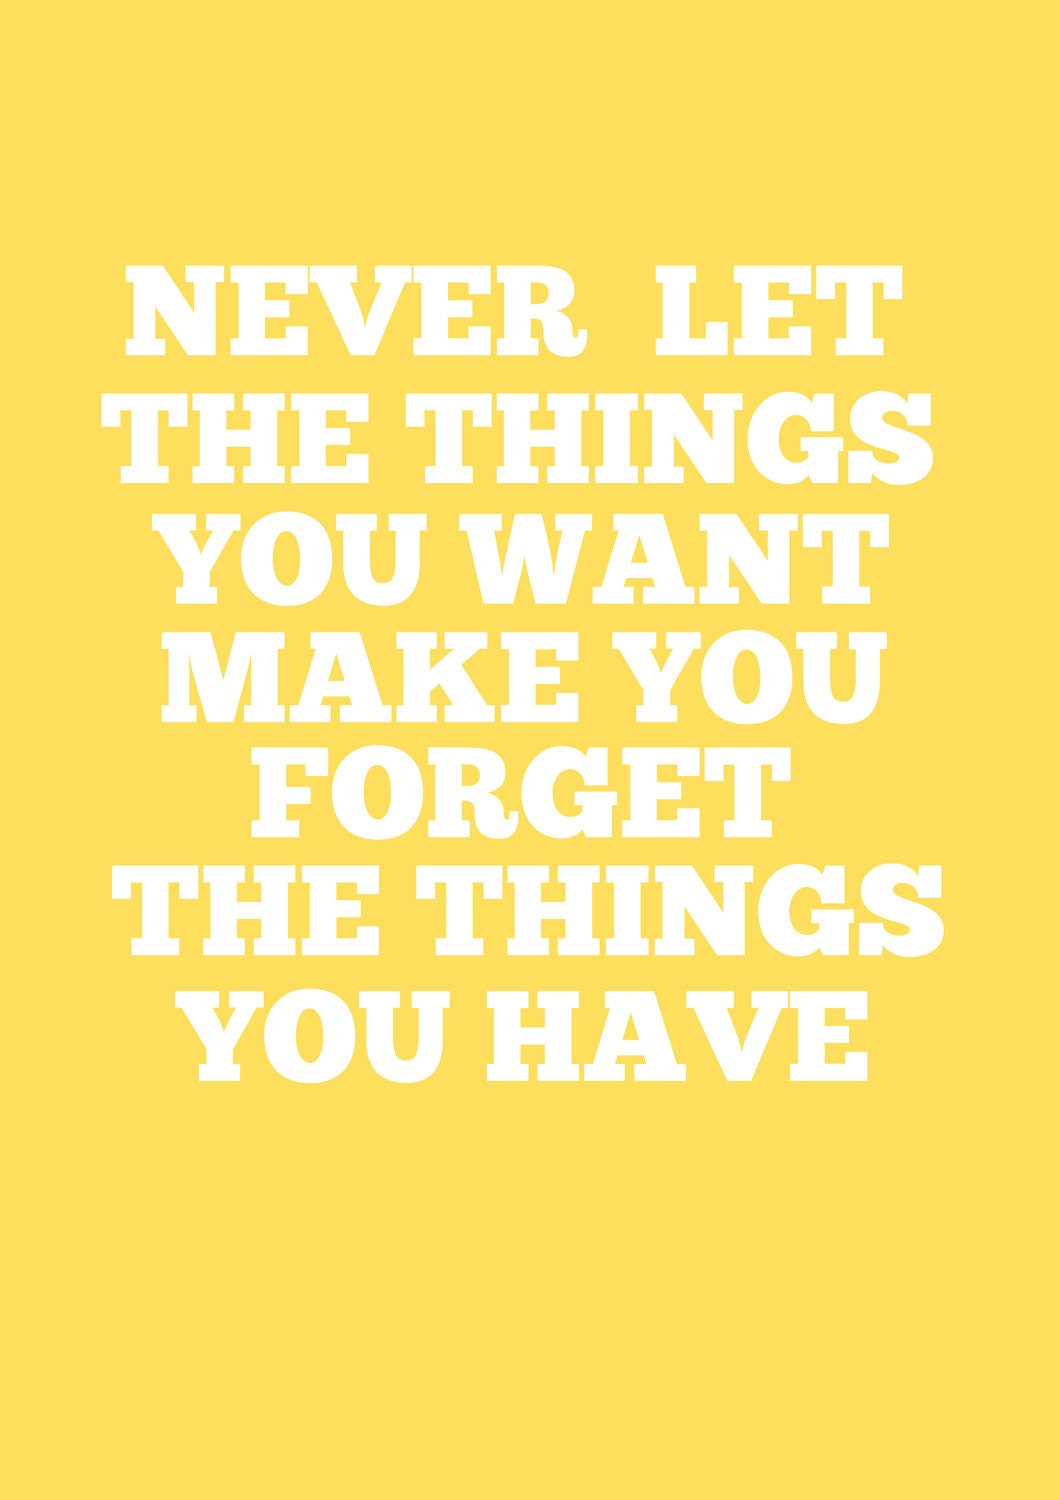 never let the things you want make you forget the things you have